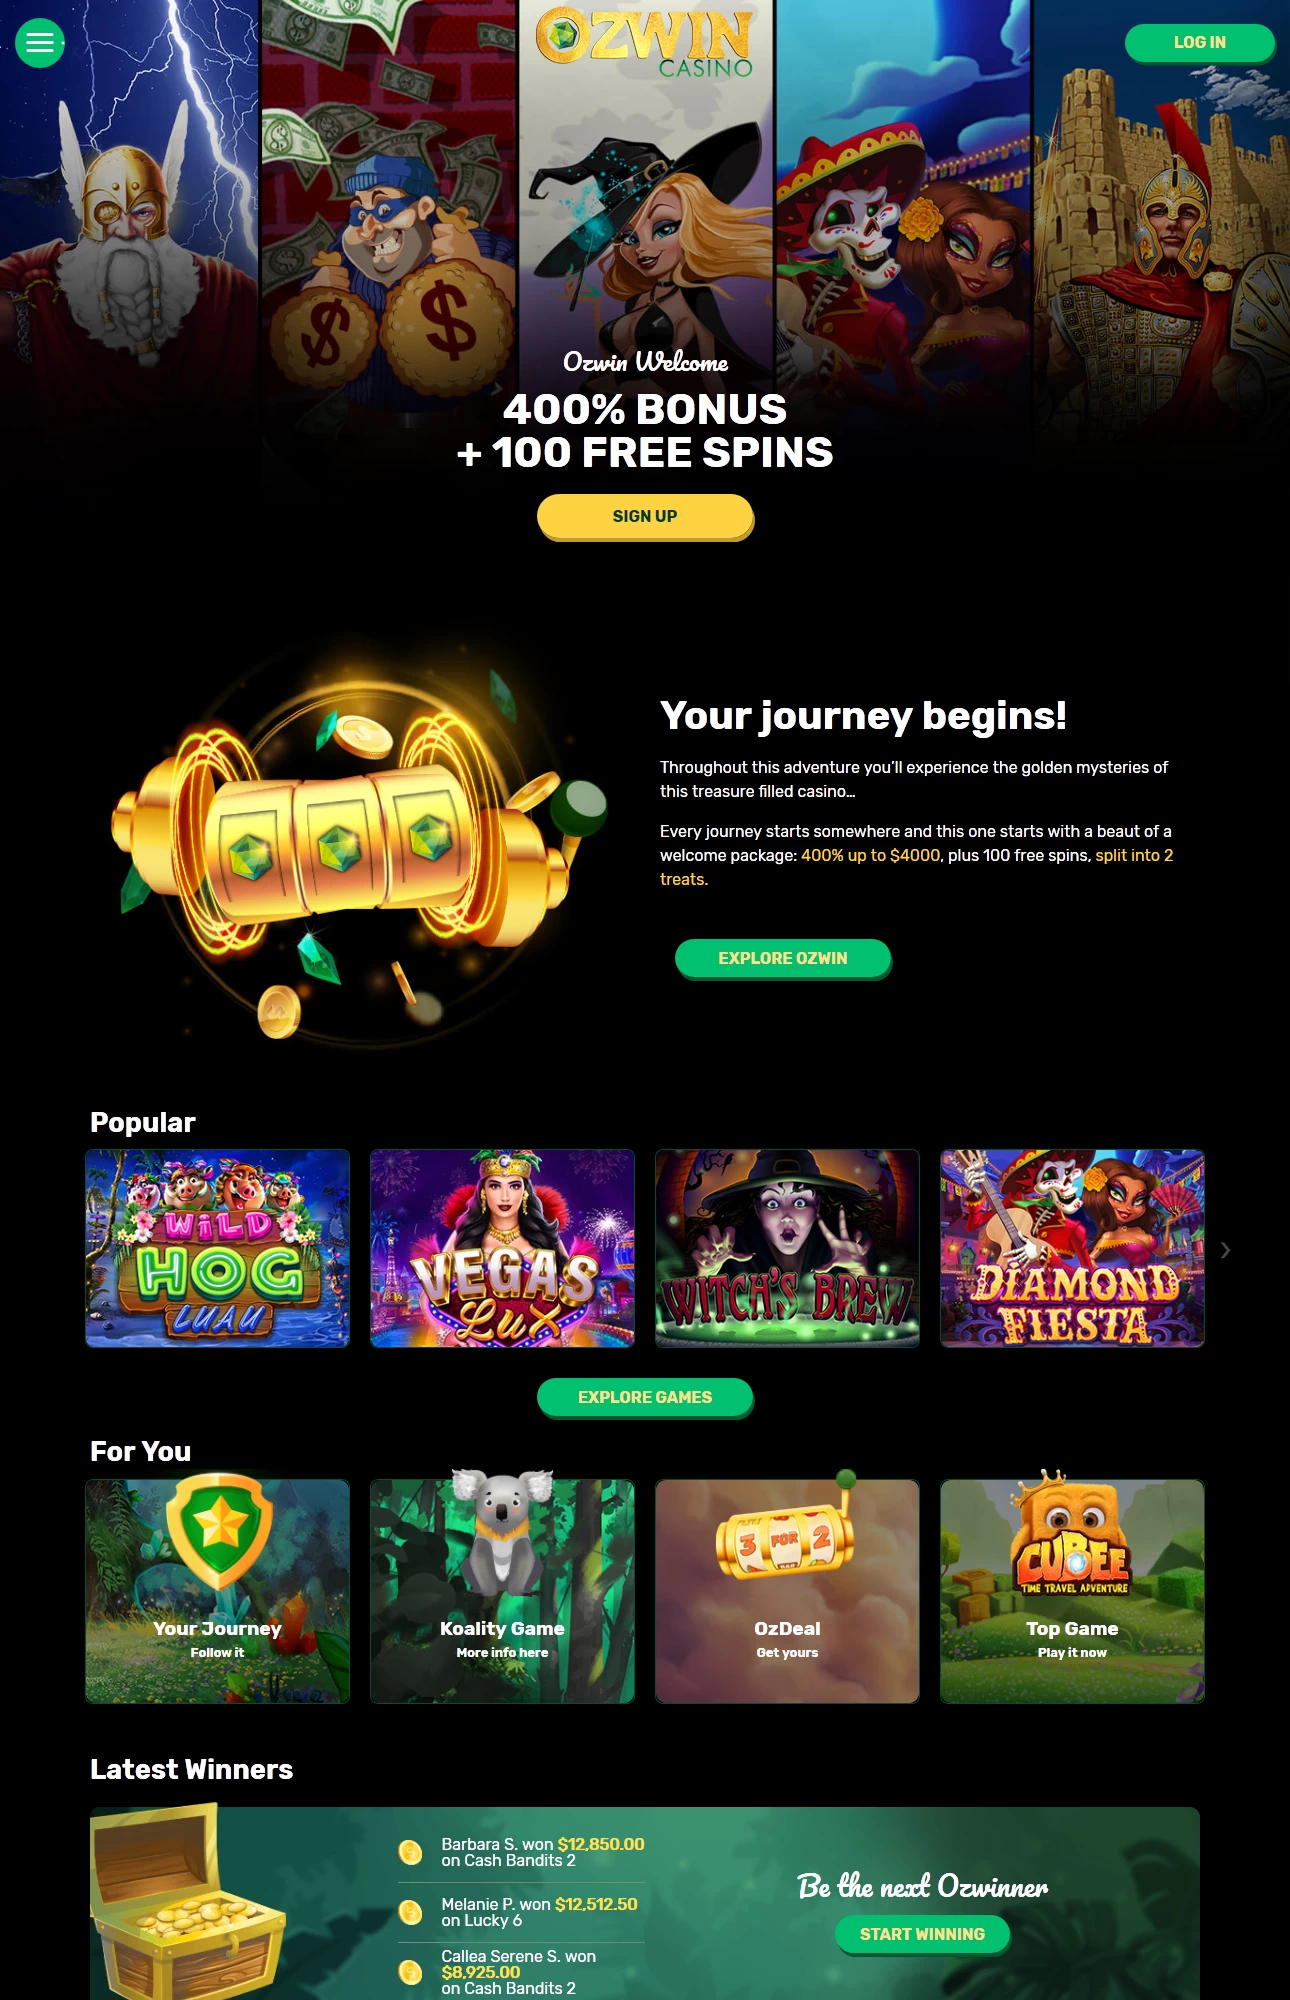 How To Get Discovered With casino